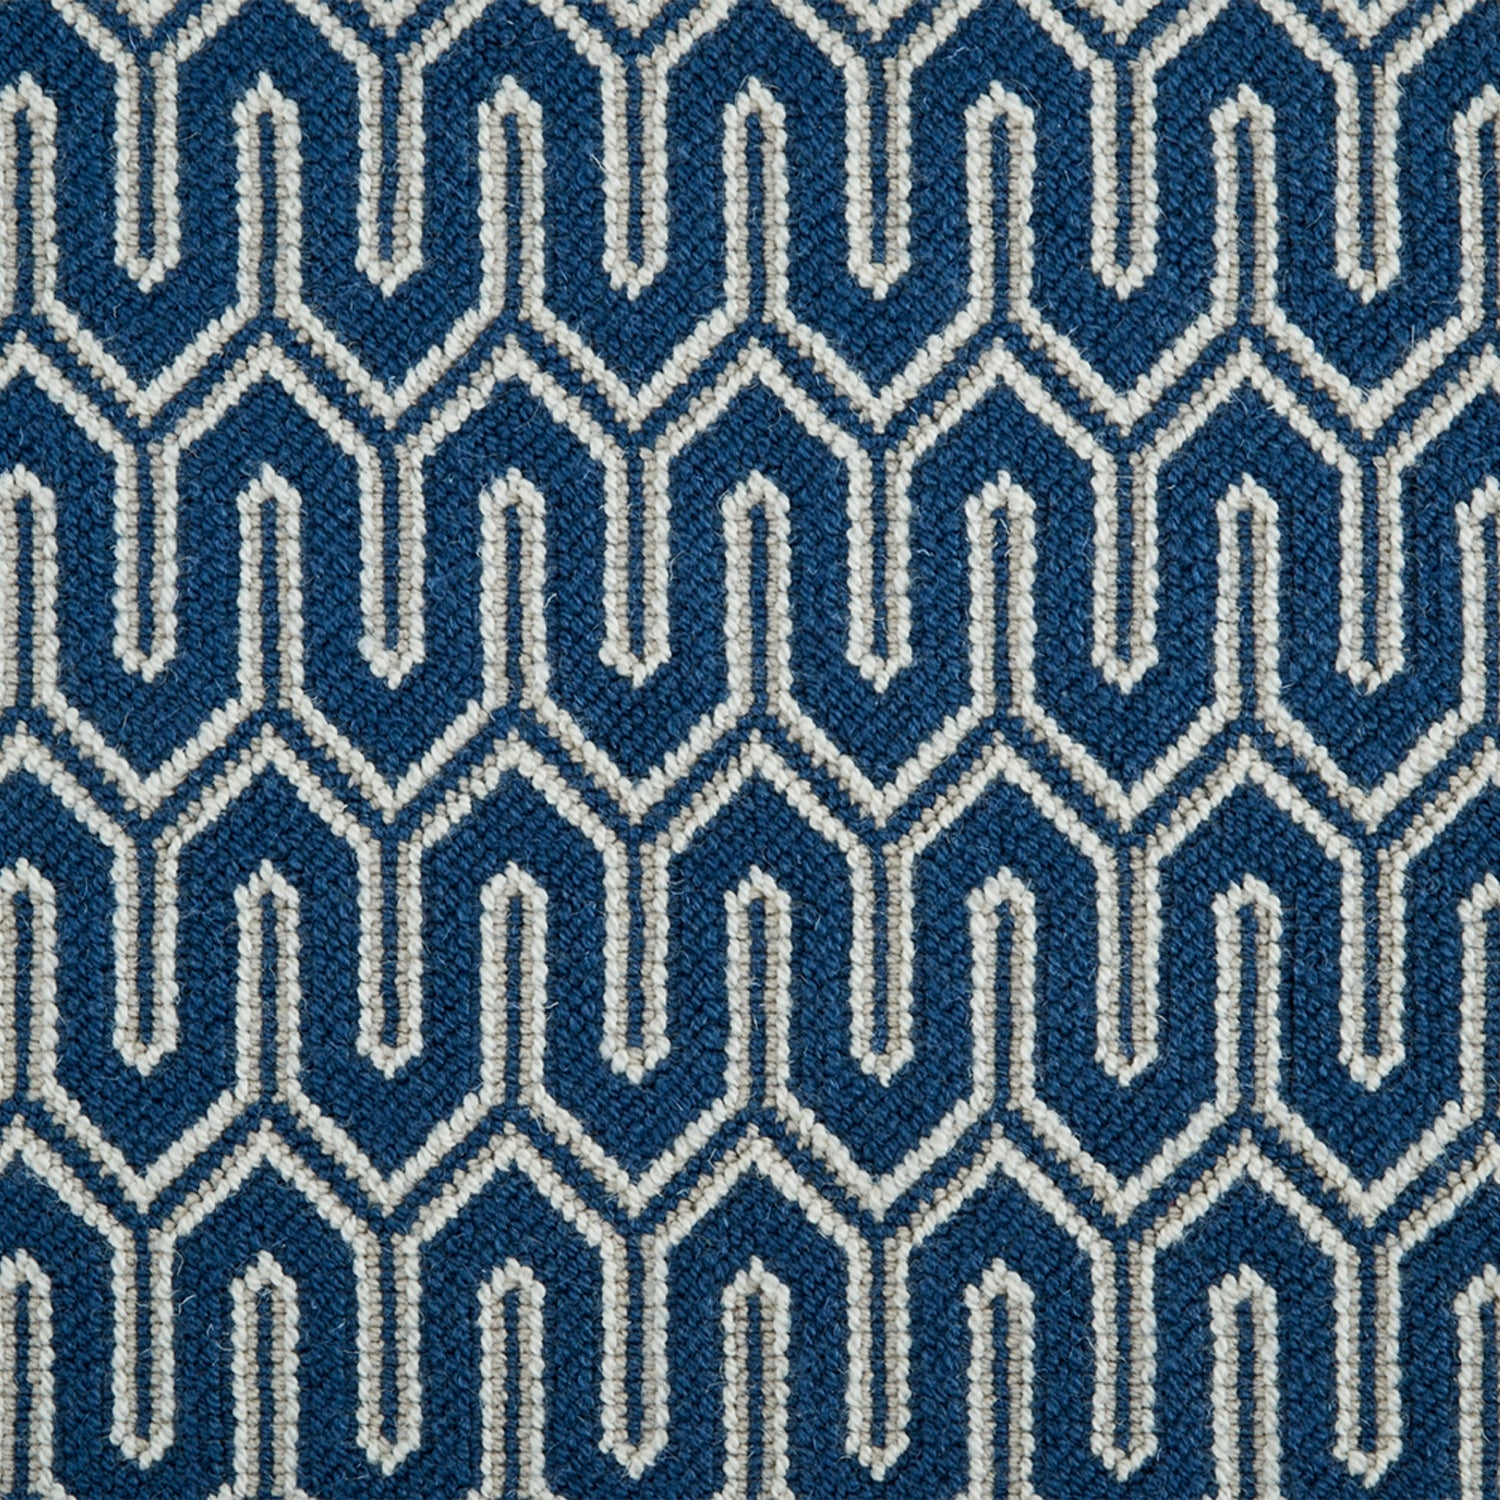 Wool-blend broadloom carpet swatch in a chunky geometric linear weave in cream, tan and navy.